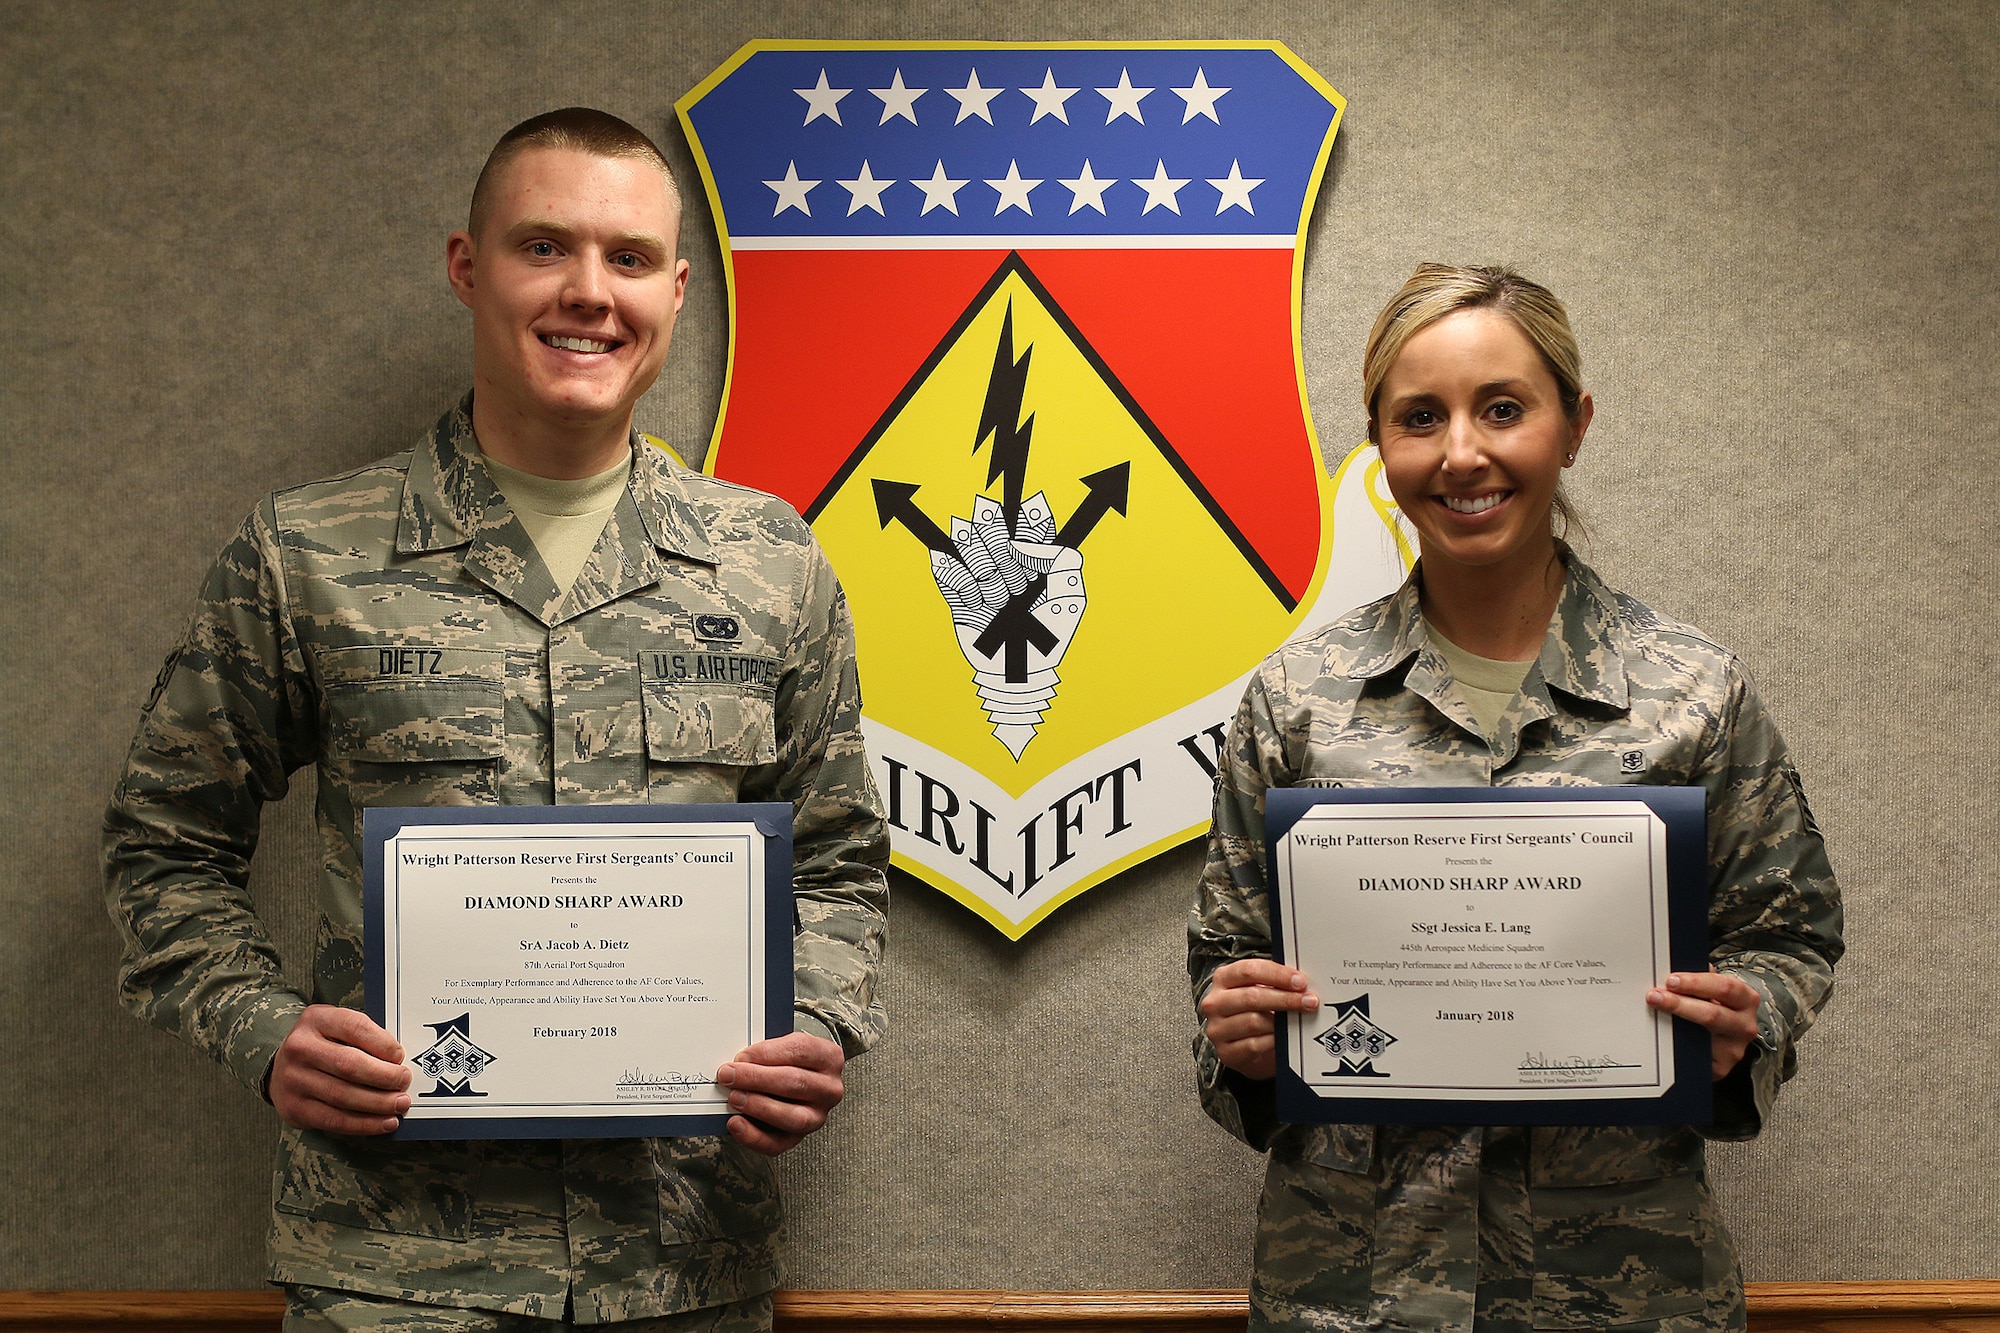 Senior Airman Jacob Dietz, 87th Aerial Port Squadron and Staff Sgt. Jessica Lang, 445th Aerospace Medical Squadron, display Diamond Sharp Awards they were presented April 7, 2018. Airman Dietz is the recipient of the February 2018 award and Sergeant Lang received the January 2018 award.